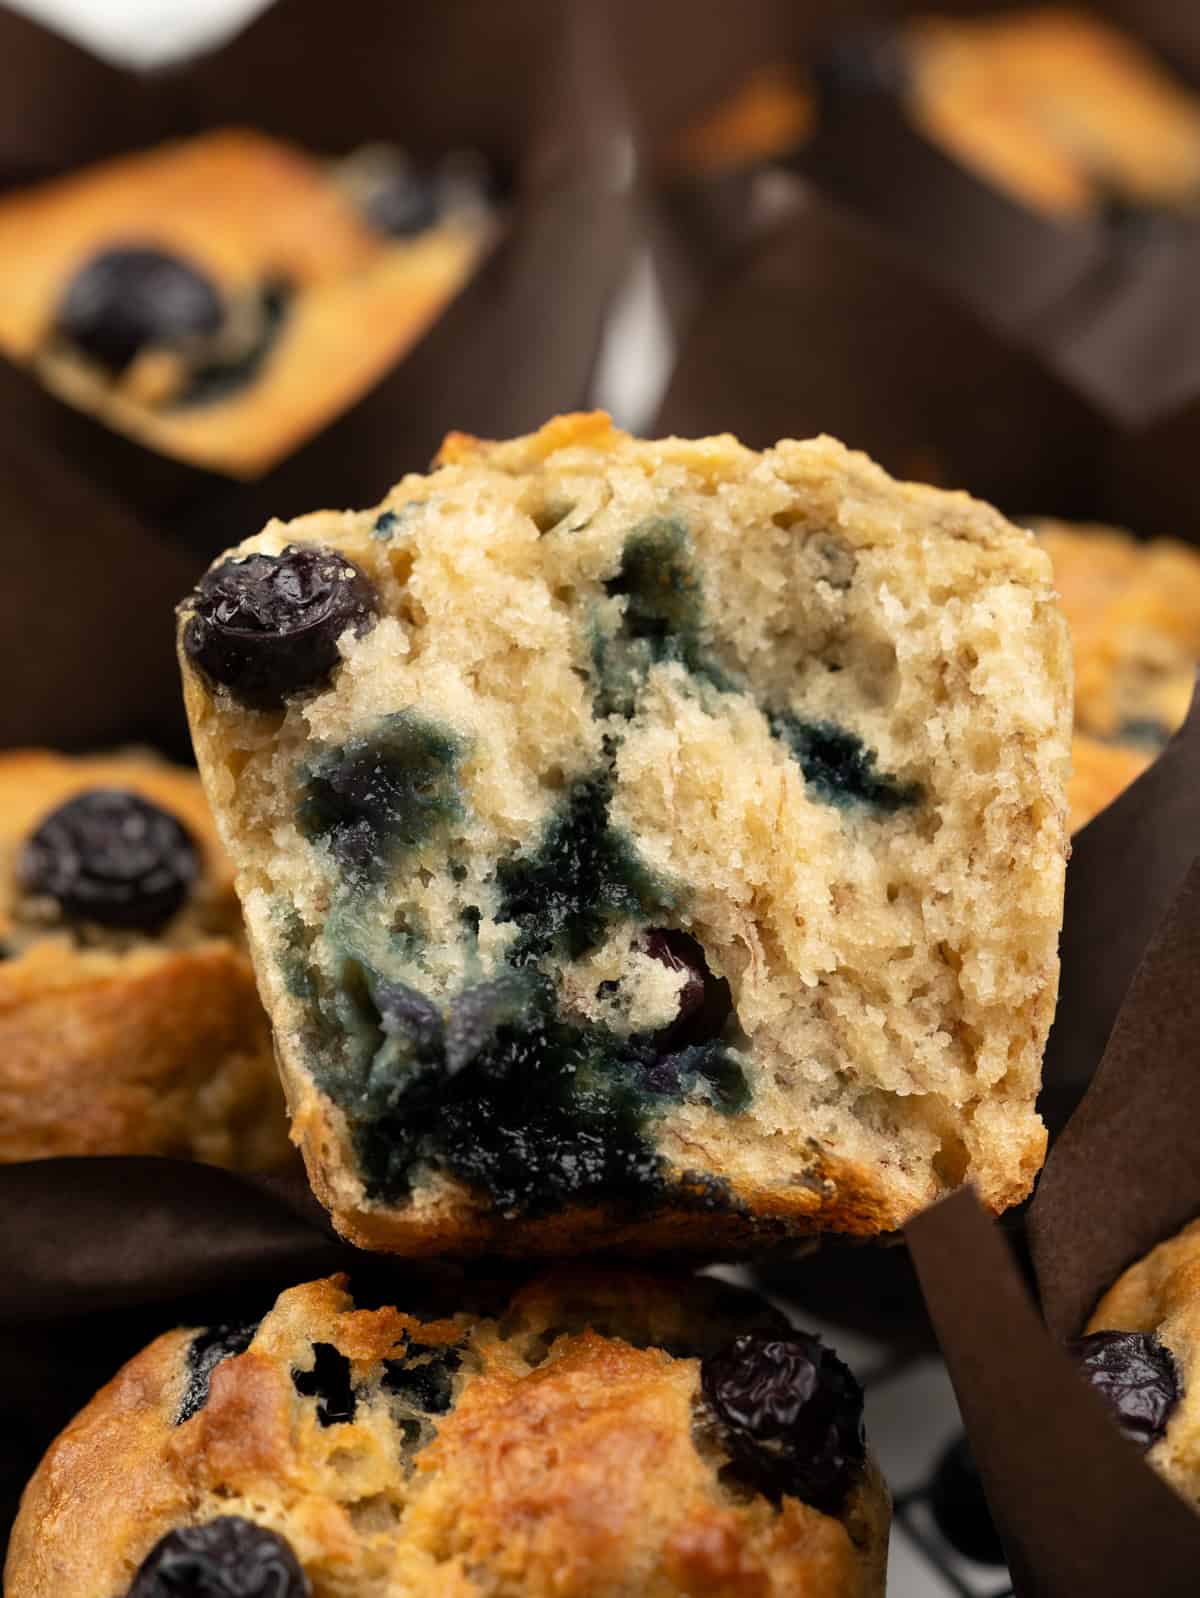 Cross section of blueberry banana muffins showing soft crumb.